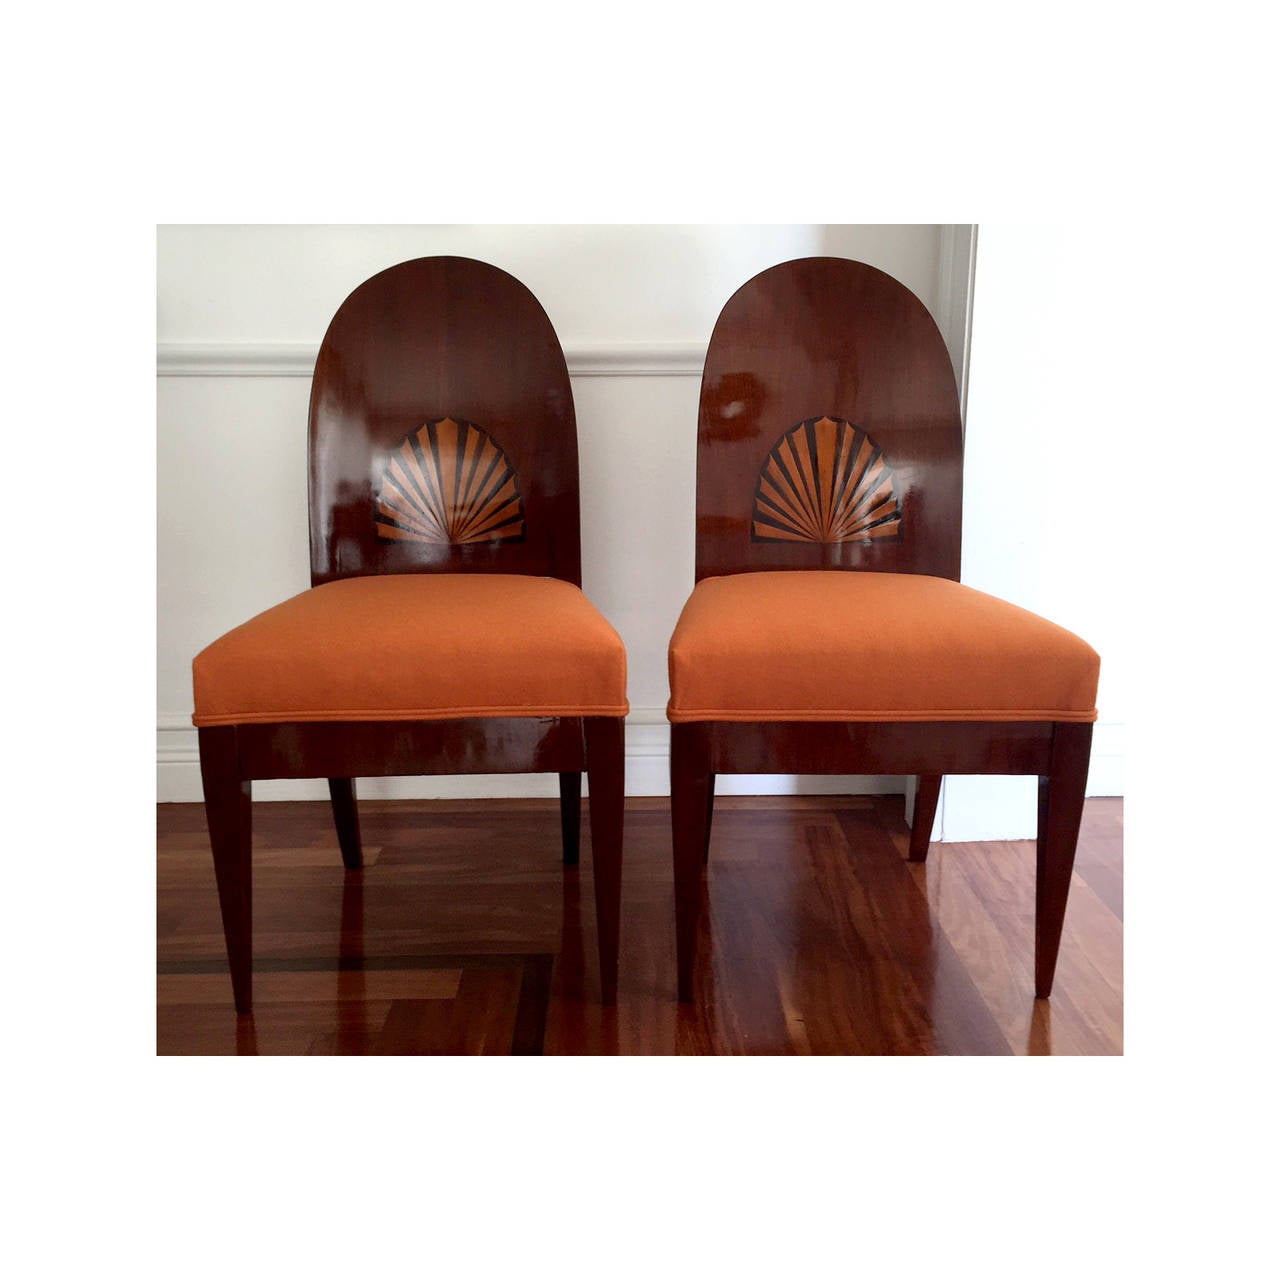 A striking pair of antique Biedermeier chairs made of mahogany circa 1820s', likely from Vienna, Austria. The chairs features a domed and curved back, creating a historical yet simple architectural form that fits seamlessly in modern interior. The